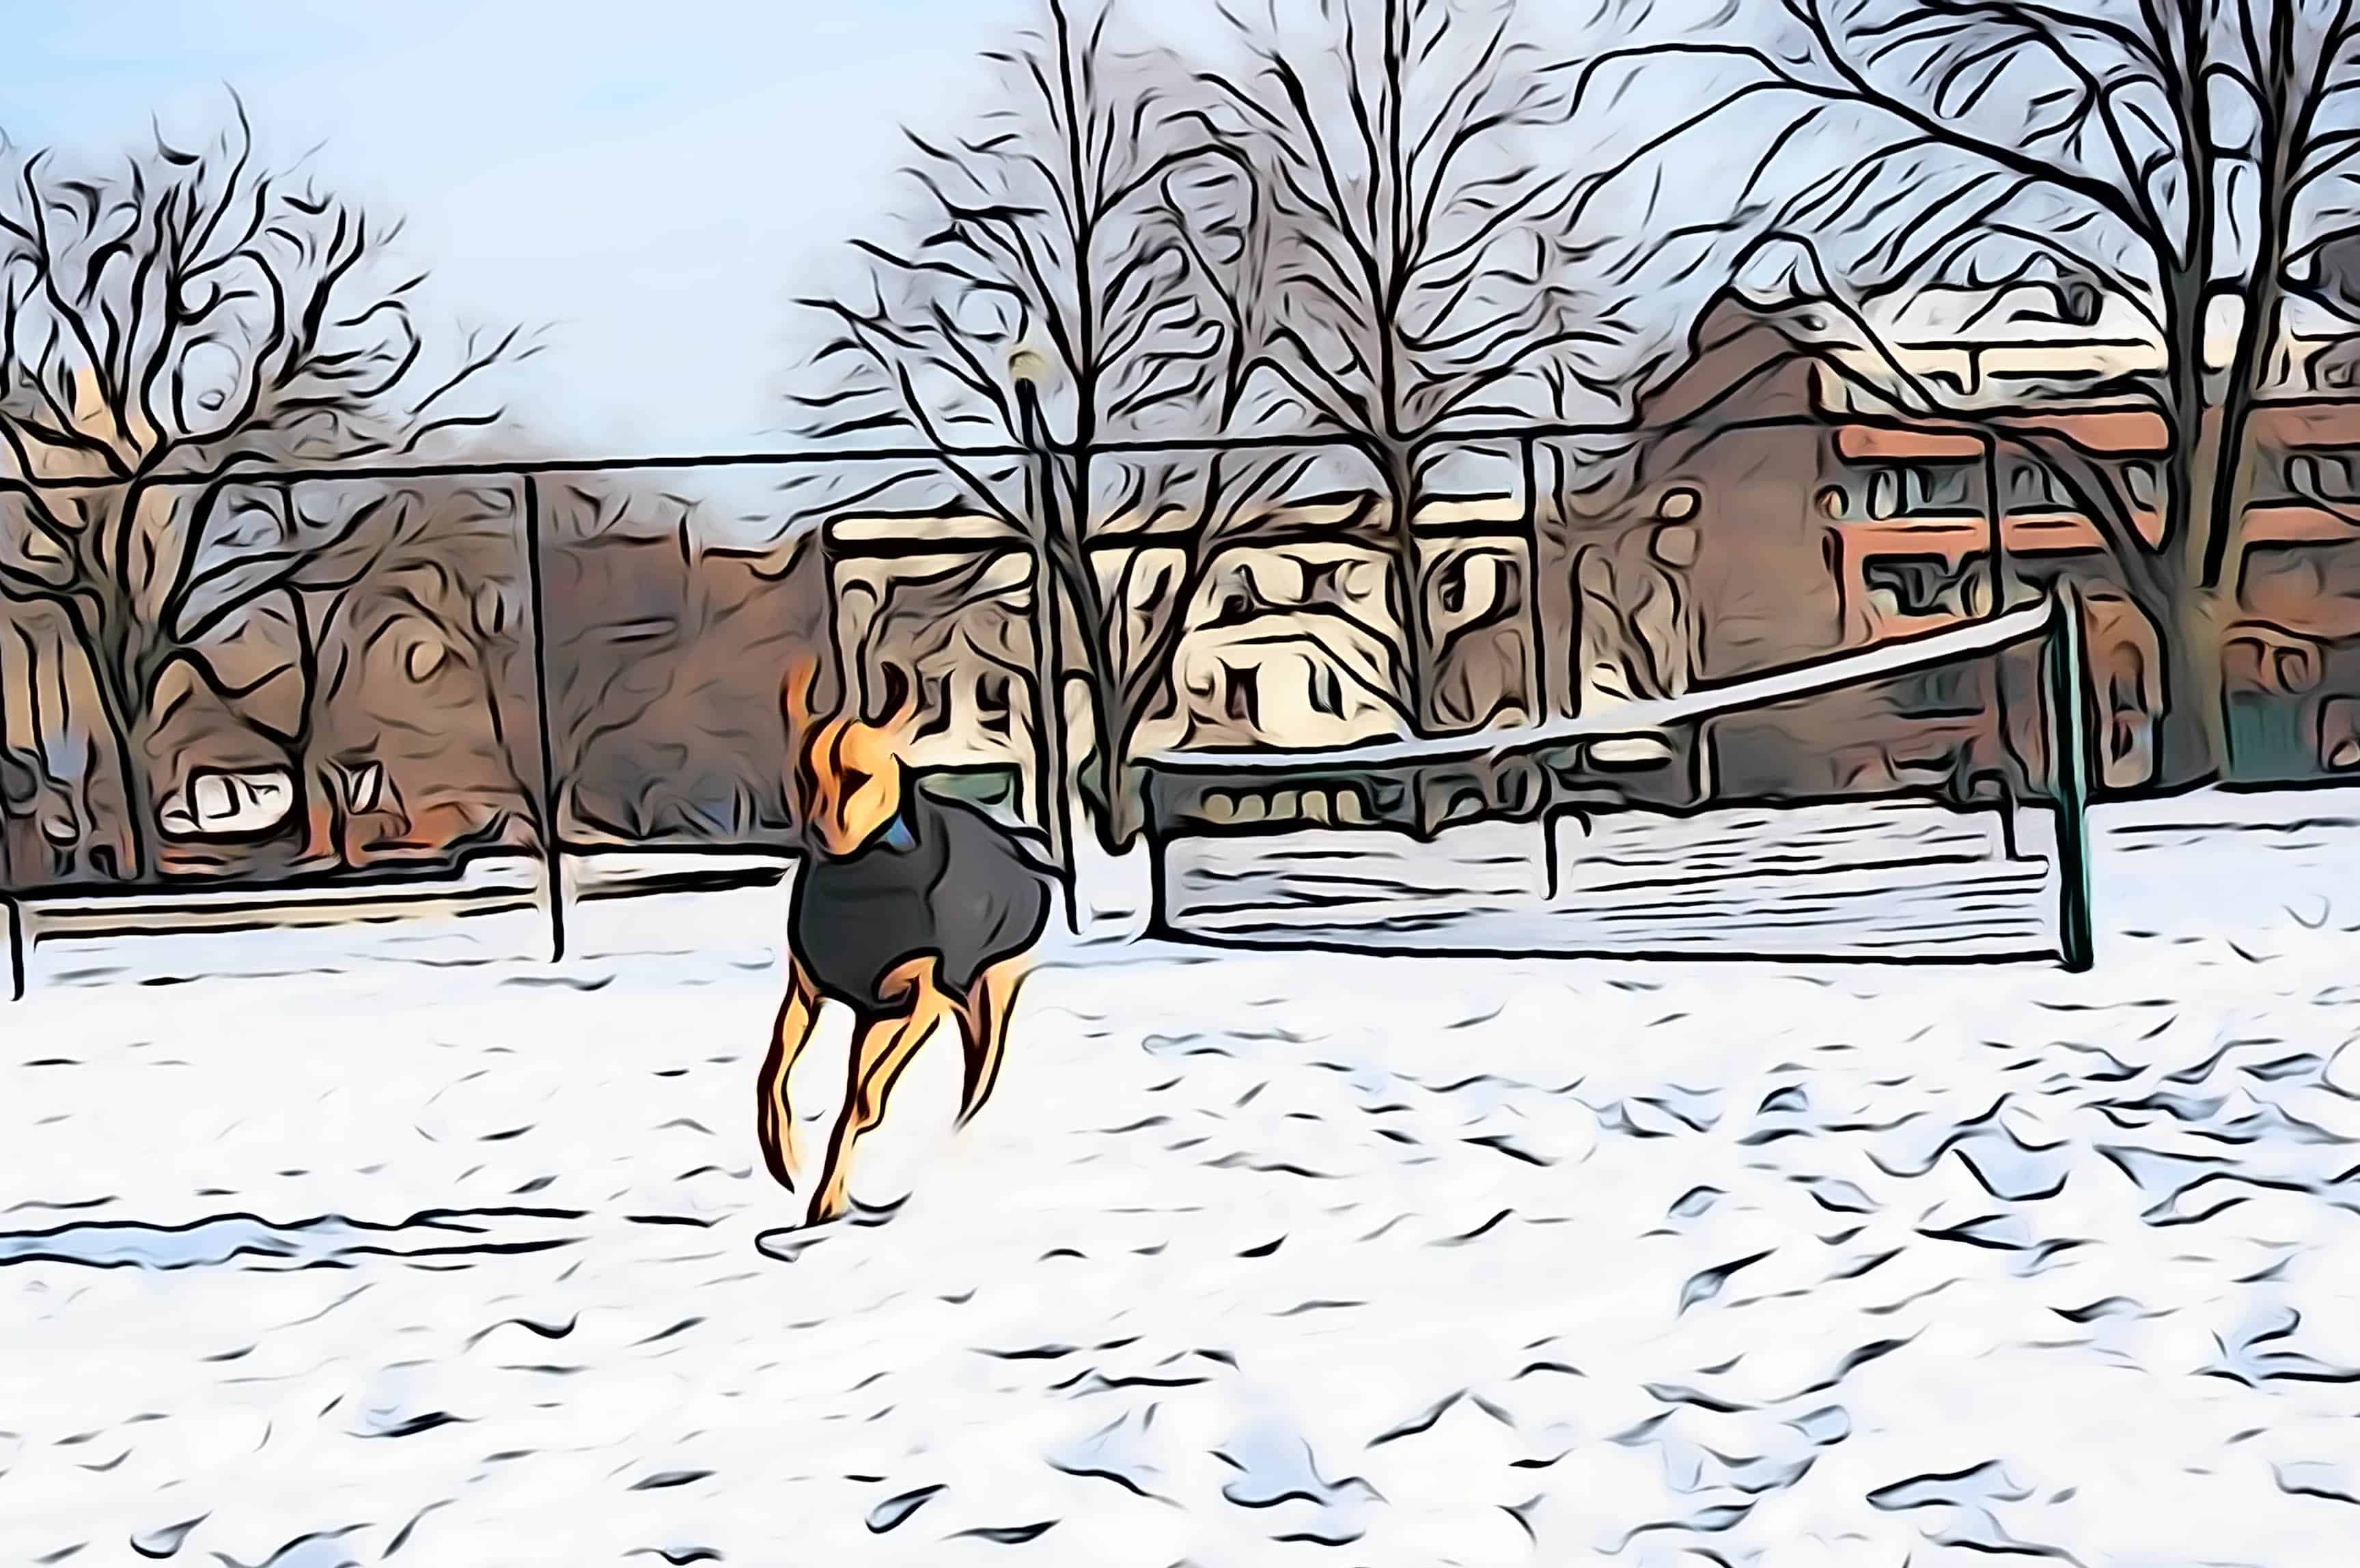 Rhodesian Ridgeback, dog blog, adventure, dogs, chicago, marking our territory, petcentric